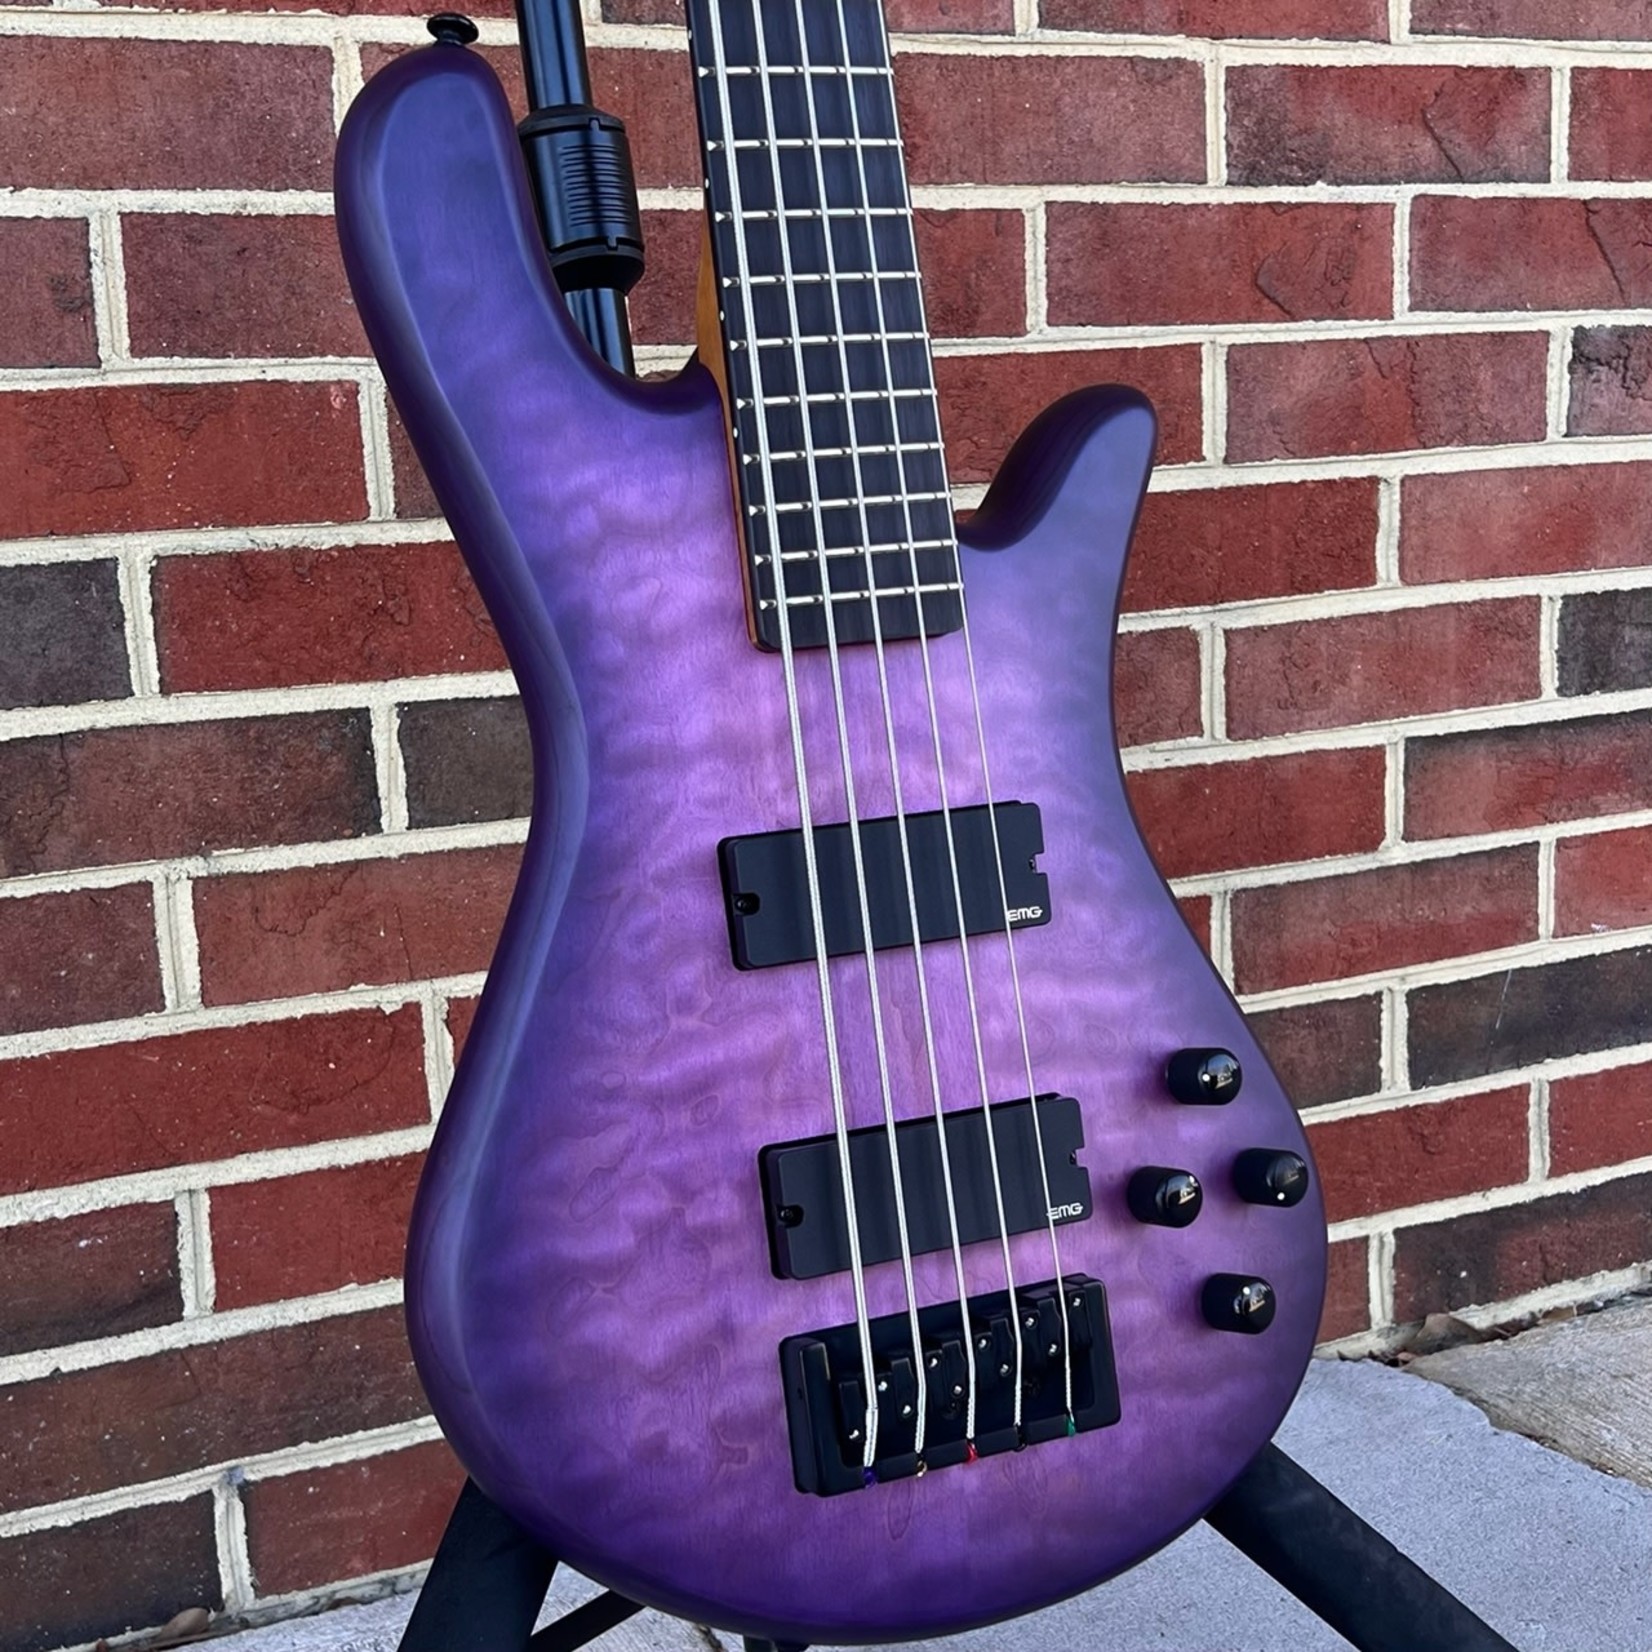 Spector Spector NS Pulse II 5-String, Ultra Violet Matte, Quilted Maple Top, Swamp Ash Body, Roasted Maple Neck, Macassar Ebony Fretboard, Gig Bag, SN# W211883